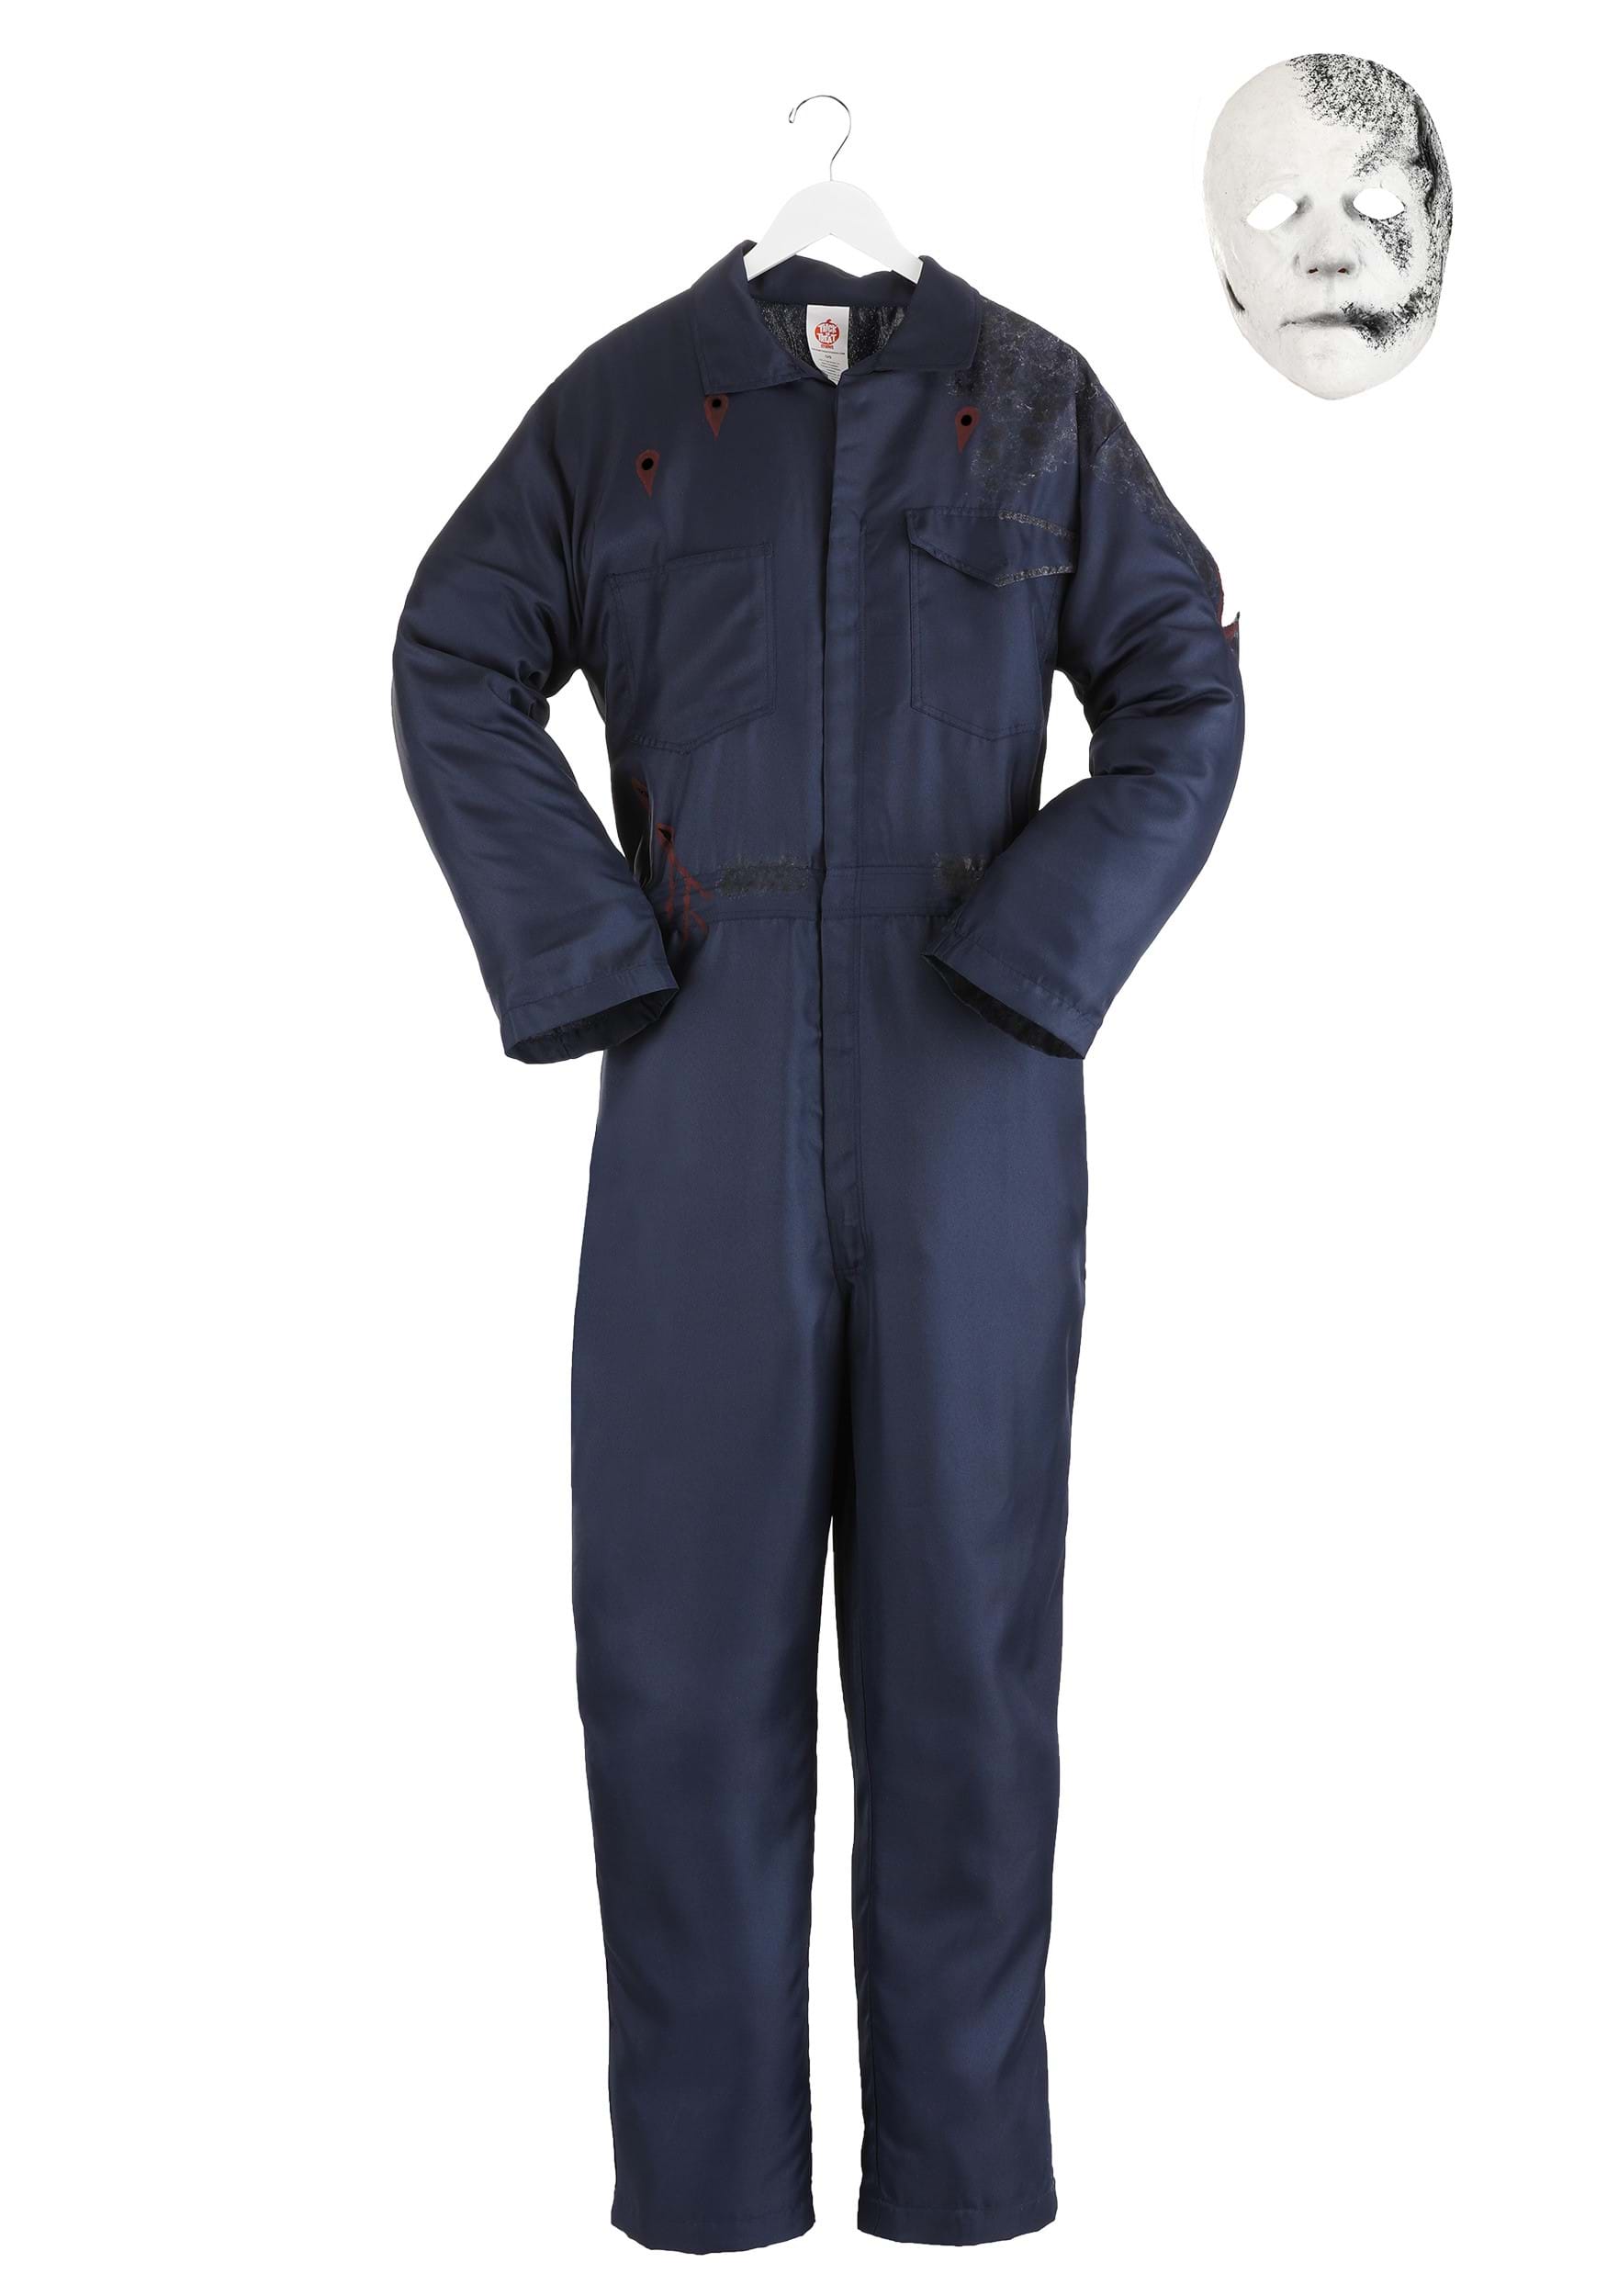 Image of Adult Halloween Kills Coveralls with Mask Combo ID TTEMMF104-ST